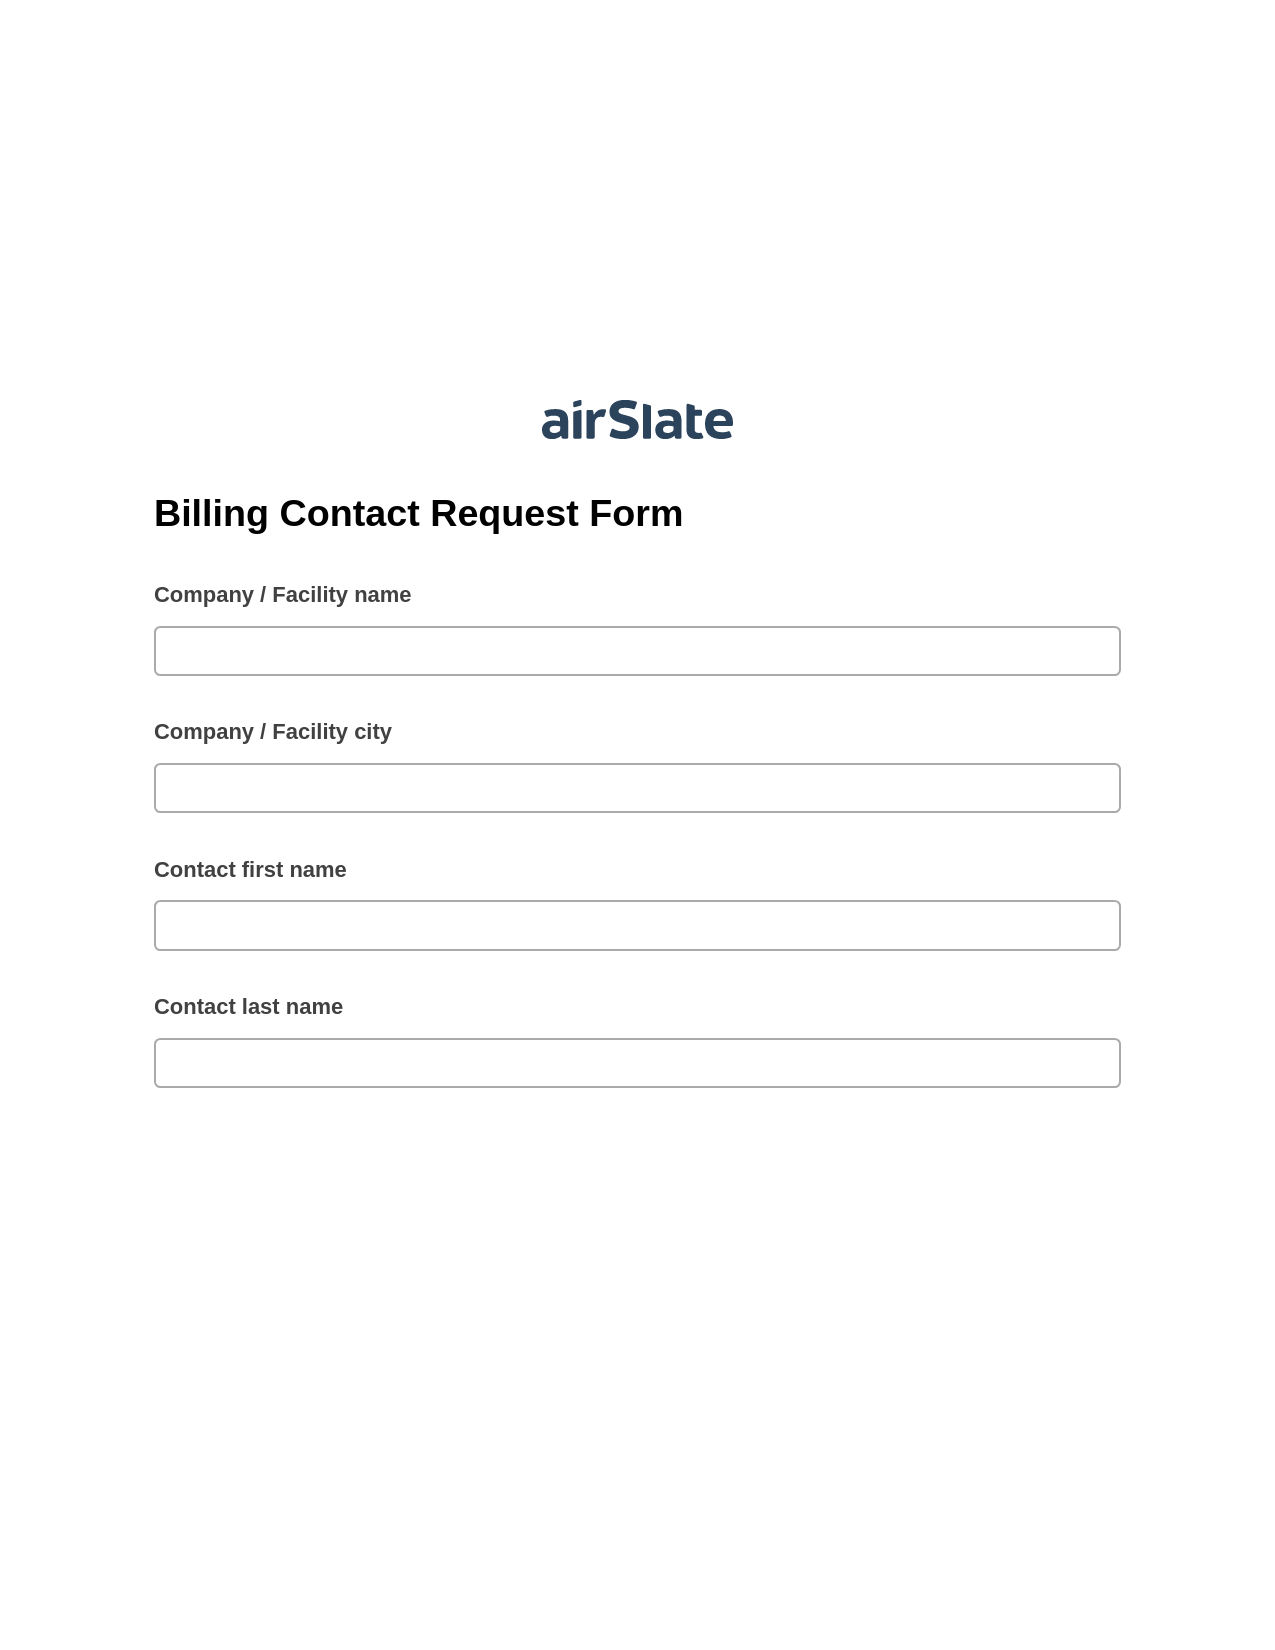 Billing Contact Request Form Pre-fill Slate from MS Dynamics 365 Records Bot, Google Calendar Bot, Export to Salesforce Bot